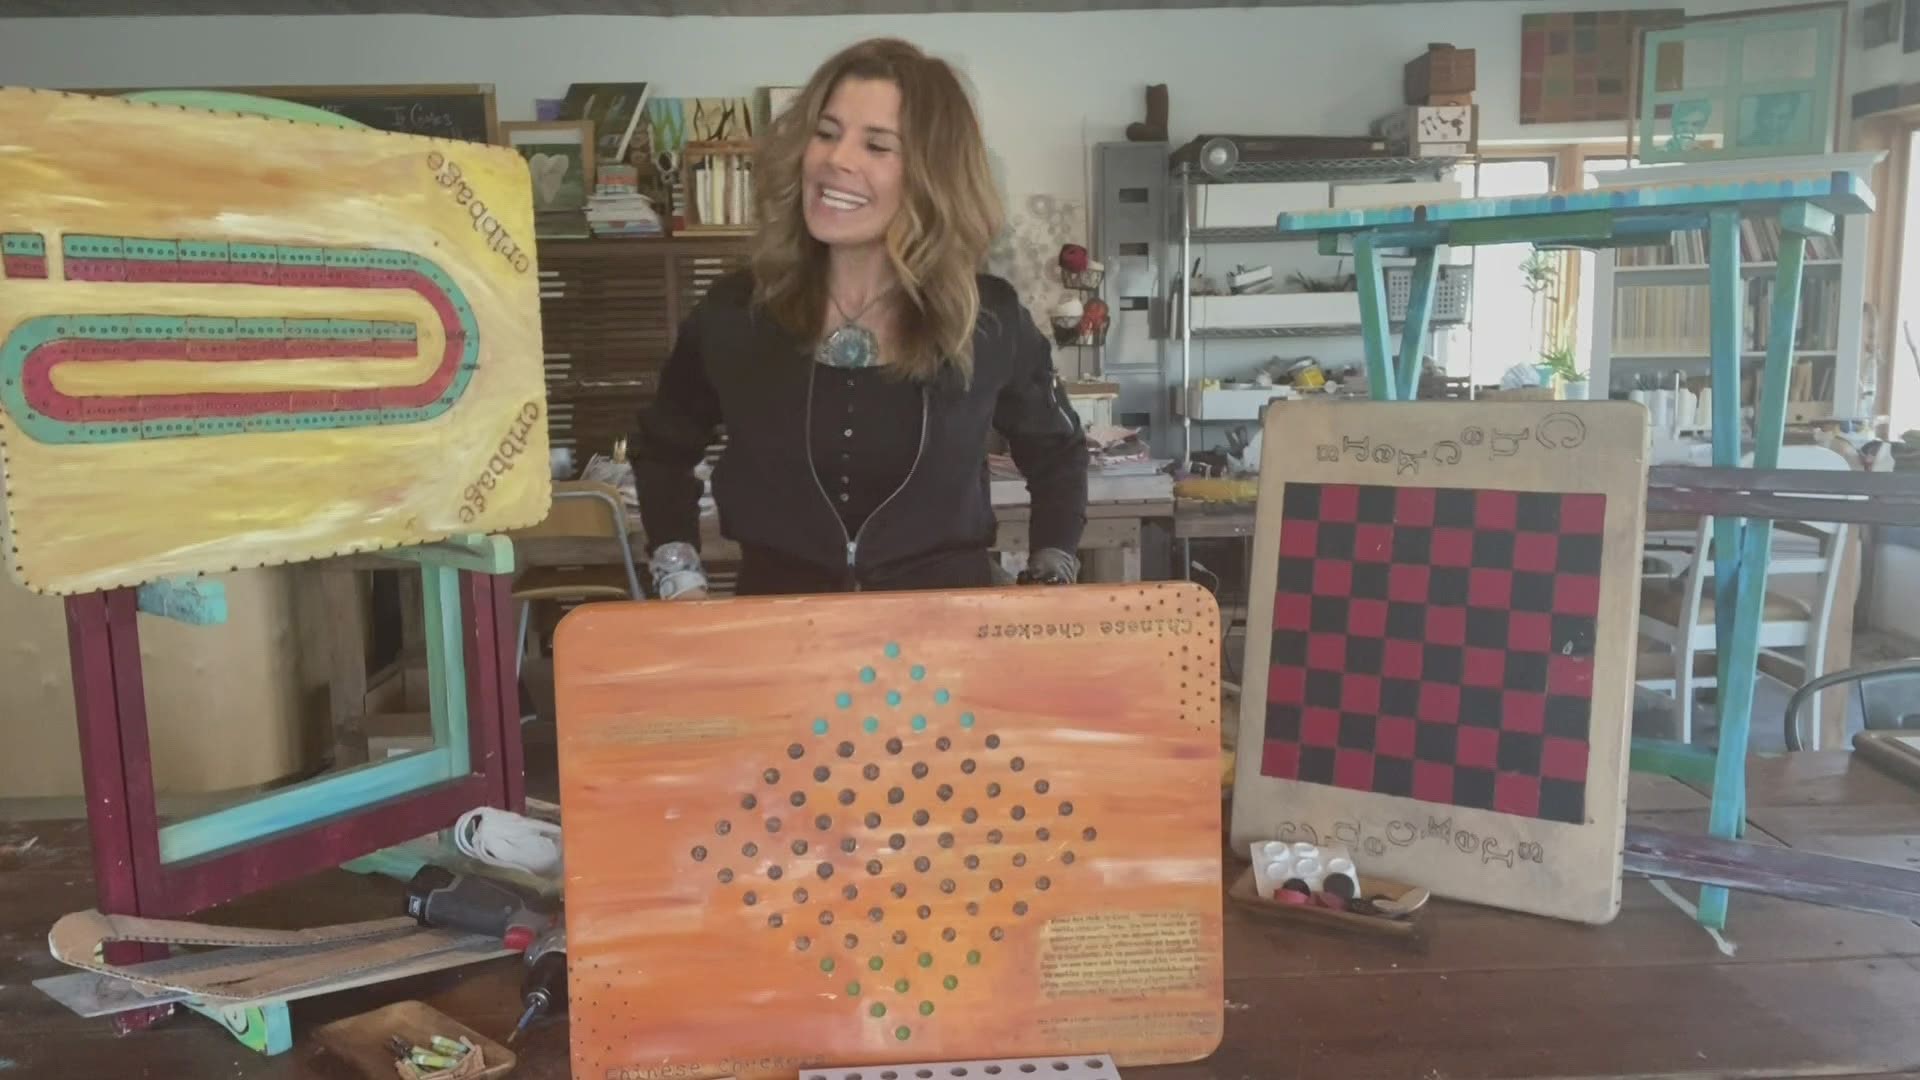 Michele creates game boards from TV trays on Iowa Live this morning